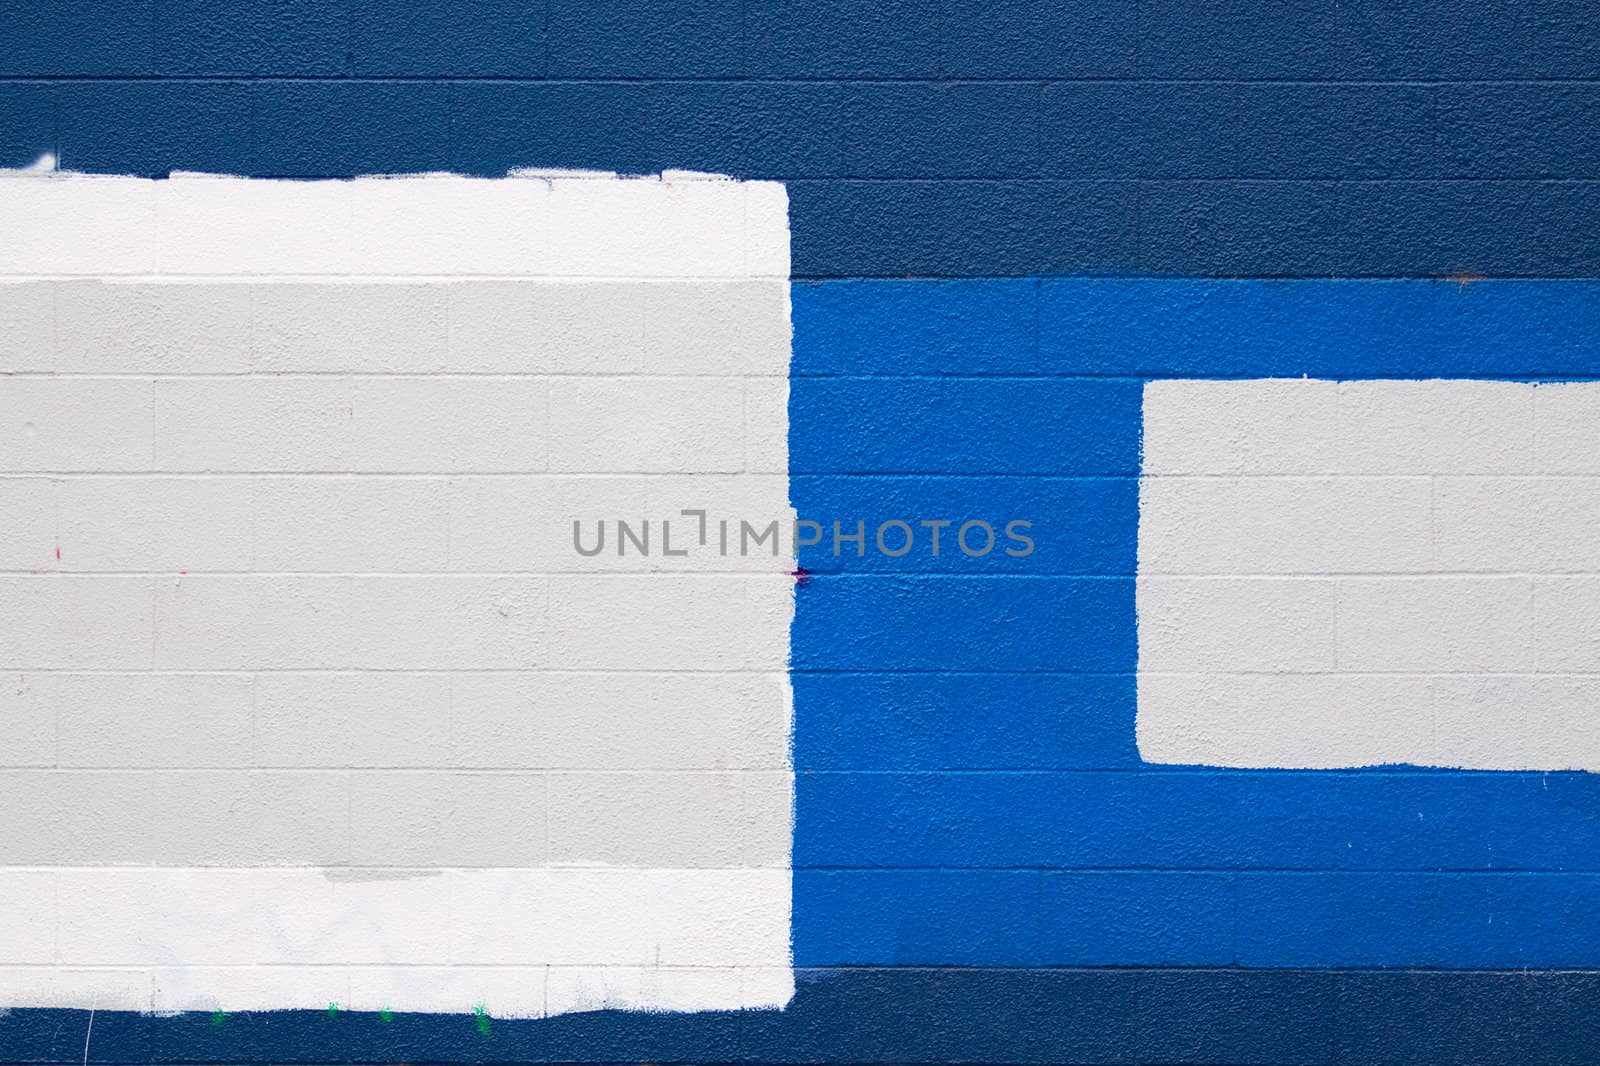 A dark blue wall with patches of grey and white to cover up graffiti in an urban scene.